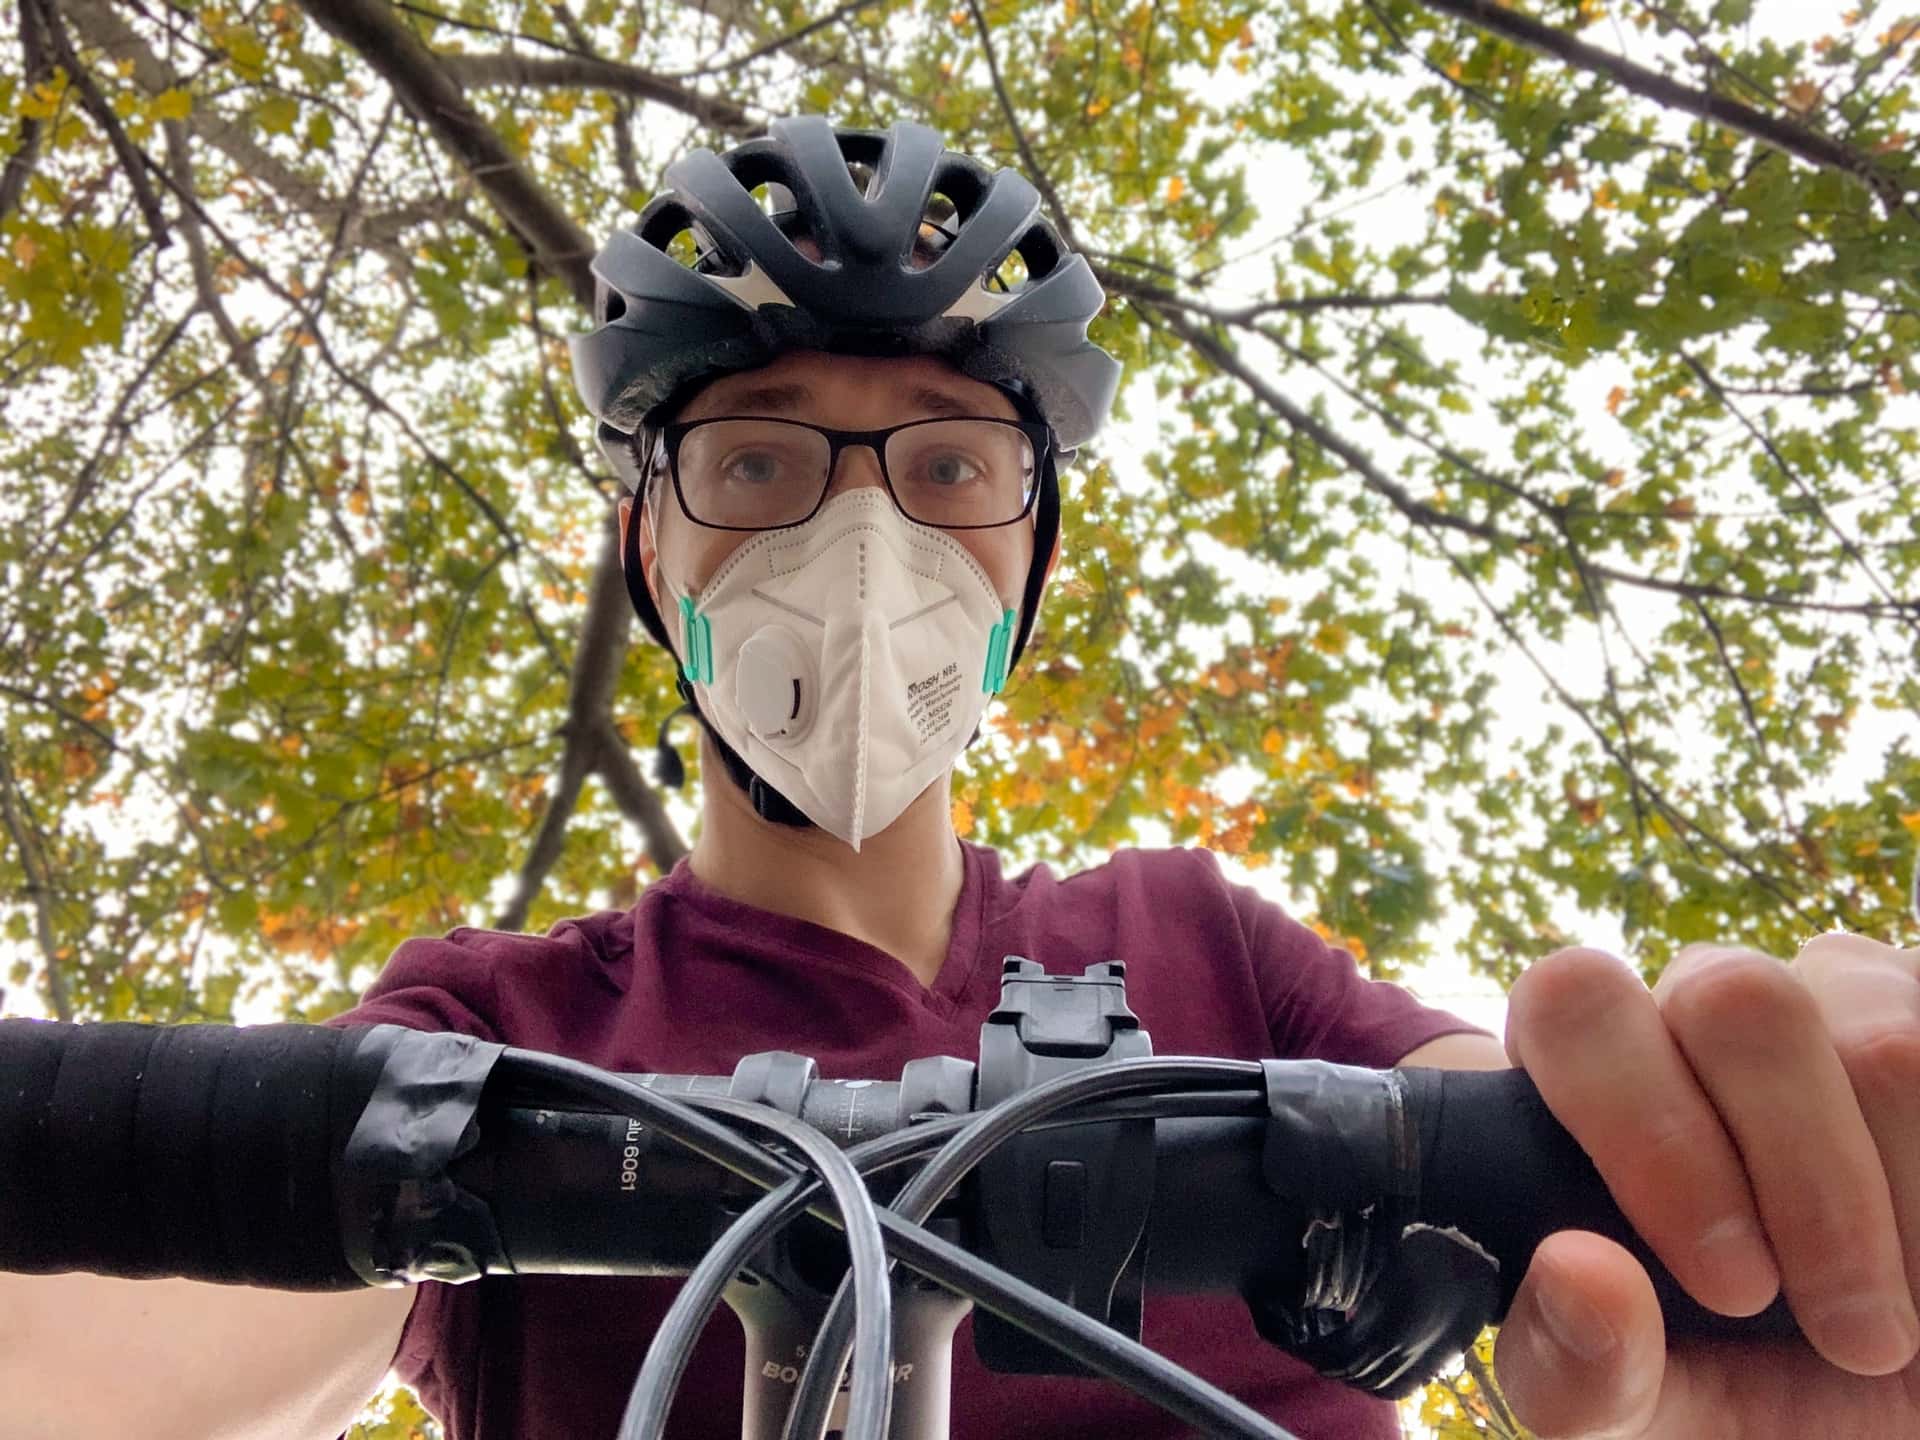 Andrew wearing an industrial N95 respirator on a bicycle in wildfire smoke